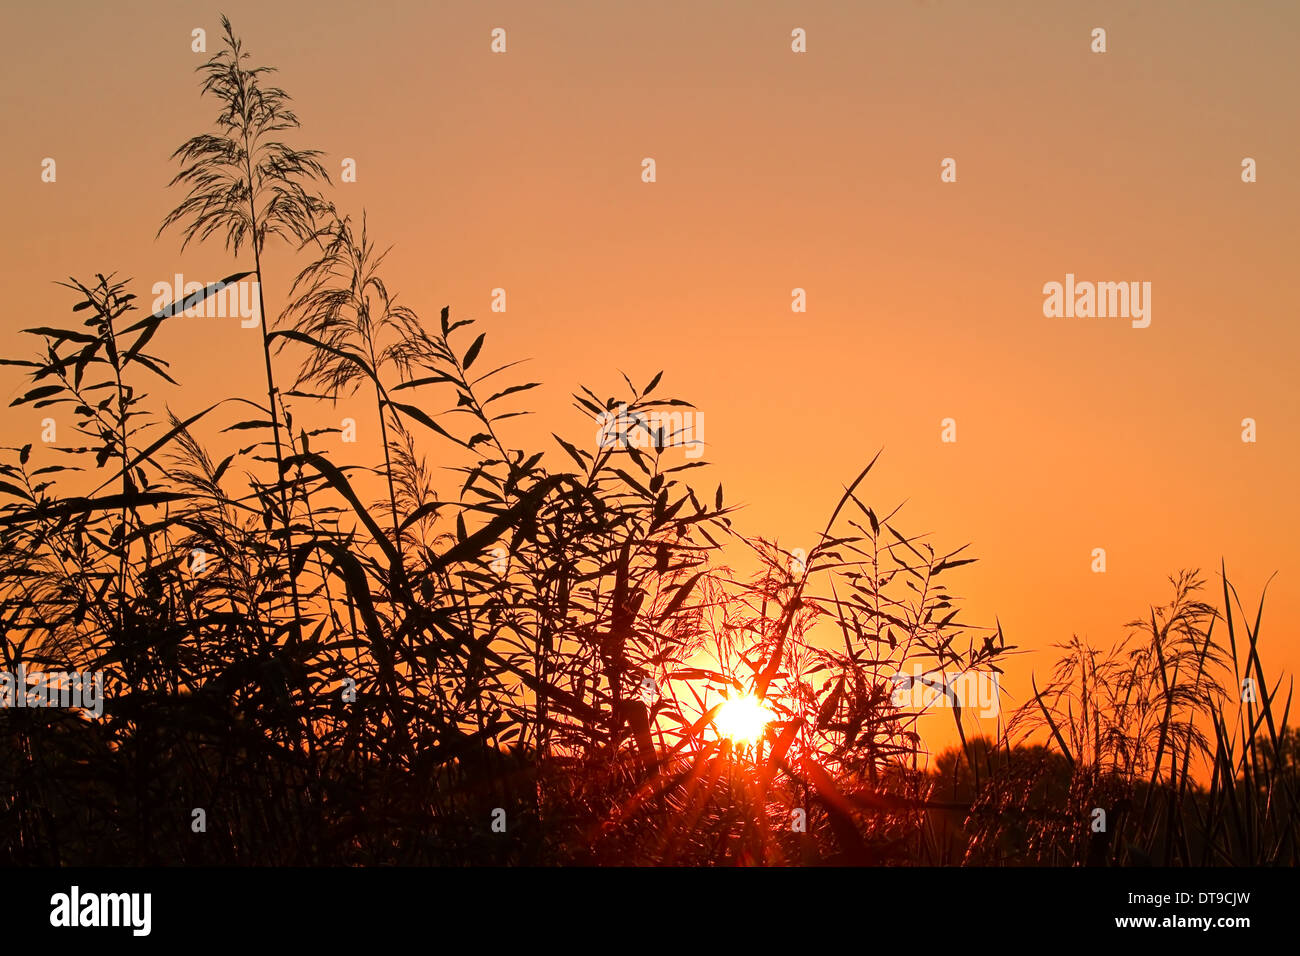 Reed silhouettes and halo around the sun at orange sunrise foretelling bad weather later on the day Stock Photo